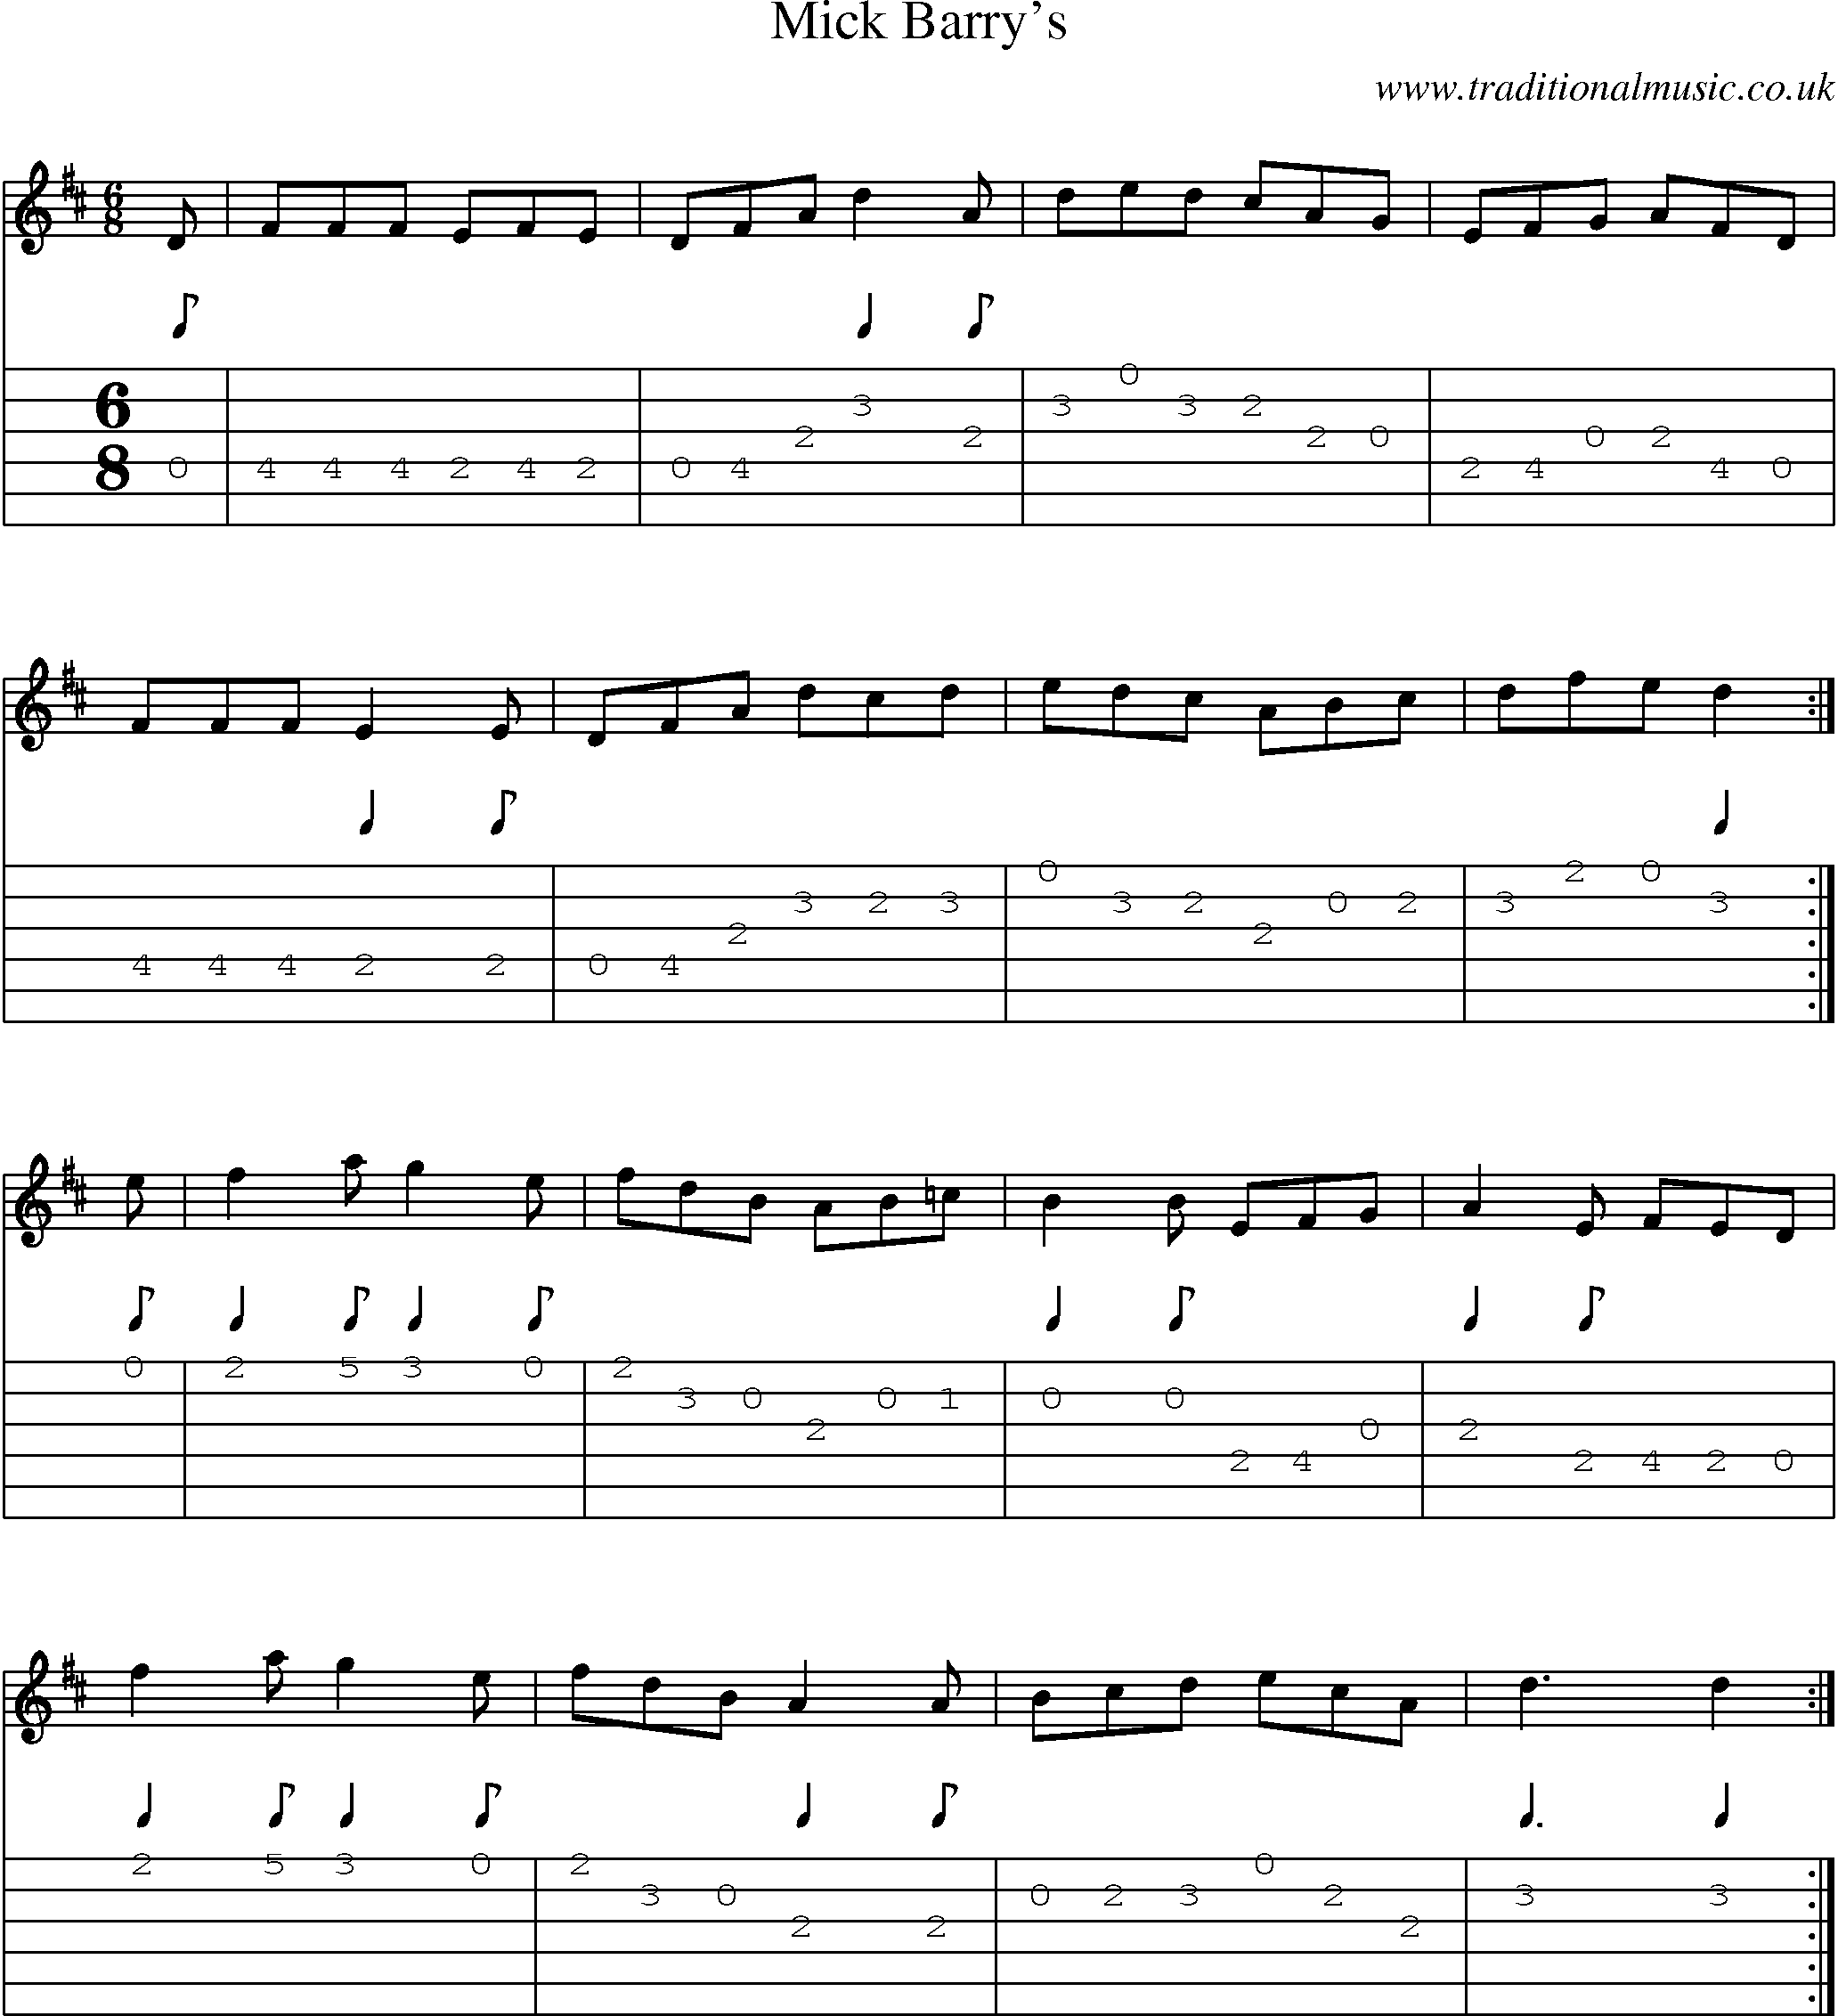 Music Score and Guitar Tabs for Mick Barrys